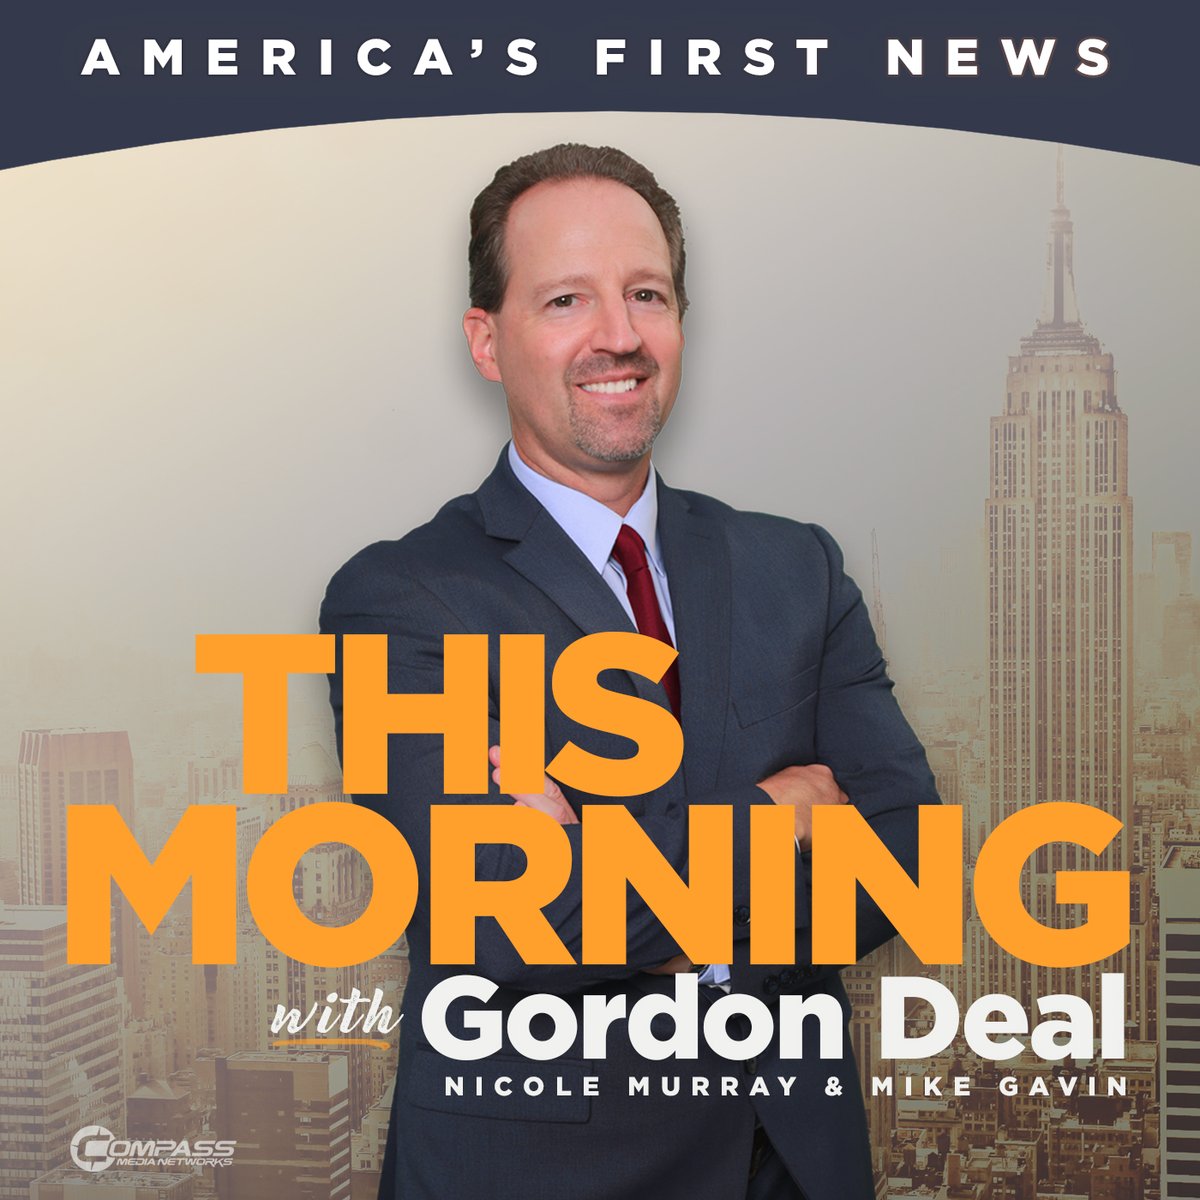 Looking to maximize your days off this summer? @GordonDeal offers some help.  #AmericasFirstNews thismorningwithgordondeal.com/n/kceqax